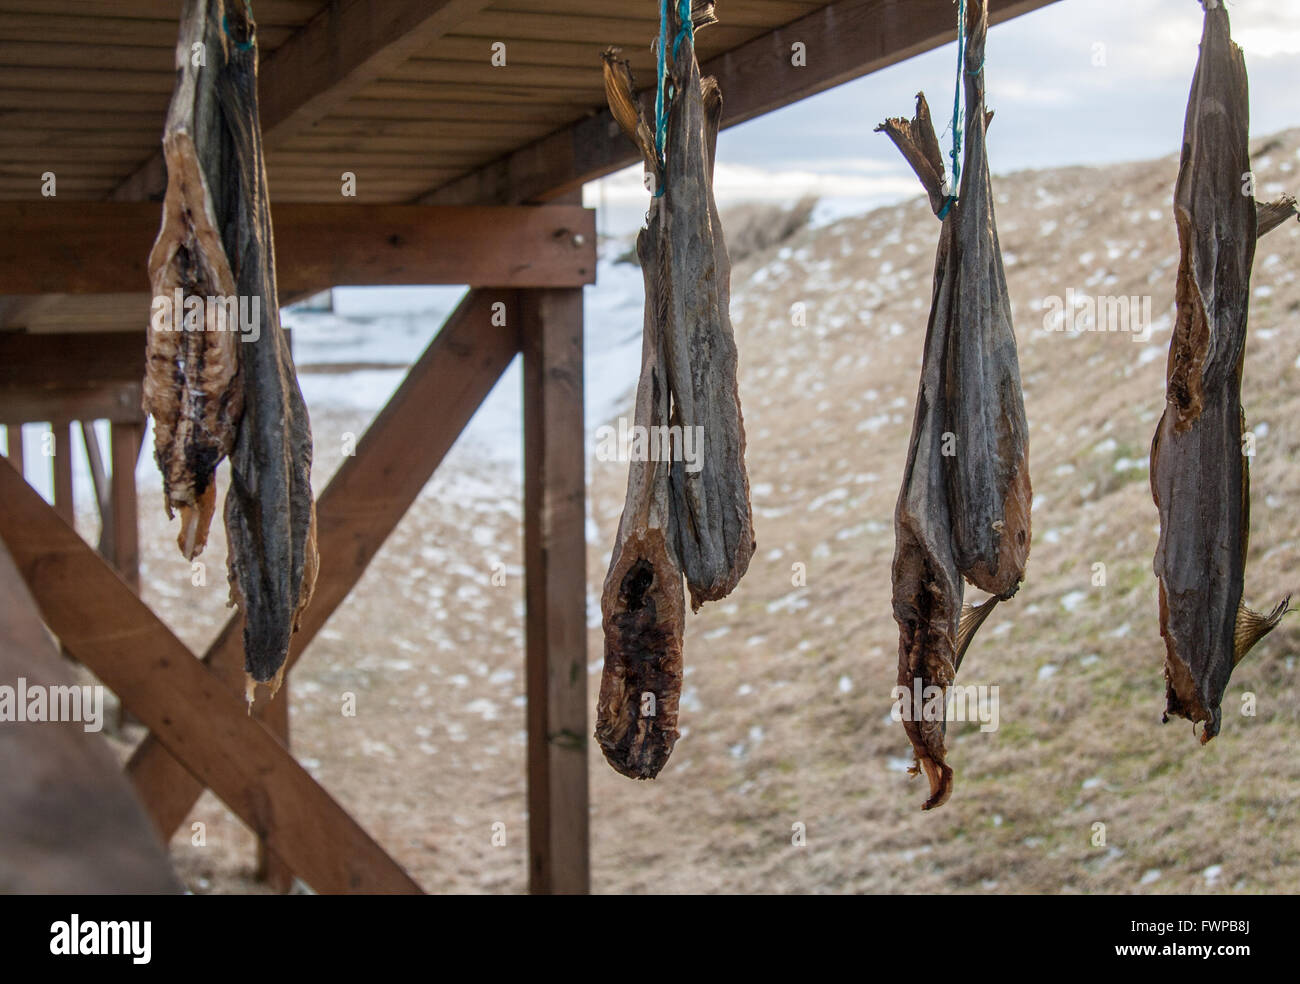 Pairs of fish hanging from drying racks at Eyrarbakki, southern Iceland, snowy beach in background Stock Photo